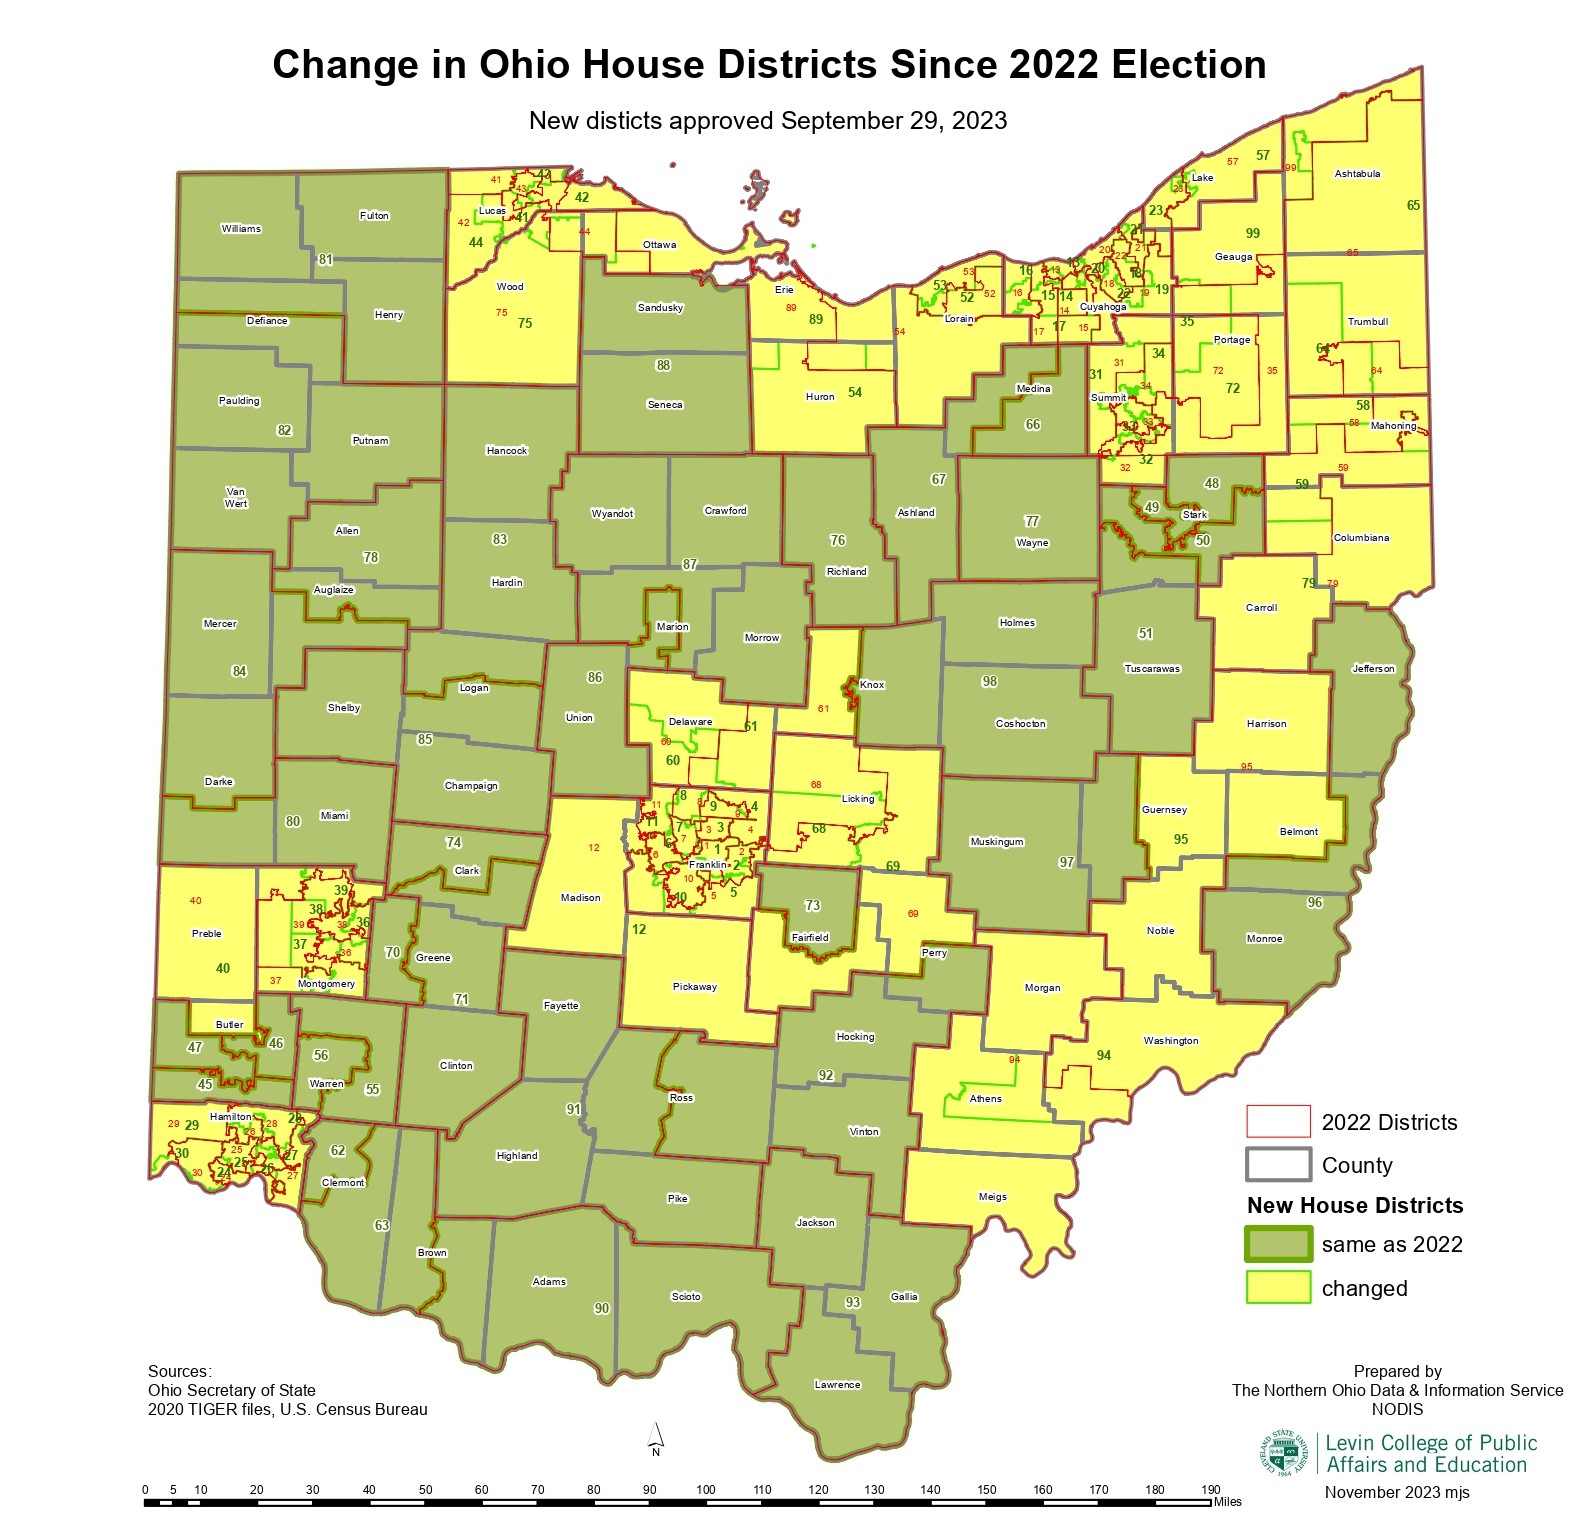 Ohio-House-Districts-Change-Since-2022-tabloid_page-0001